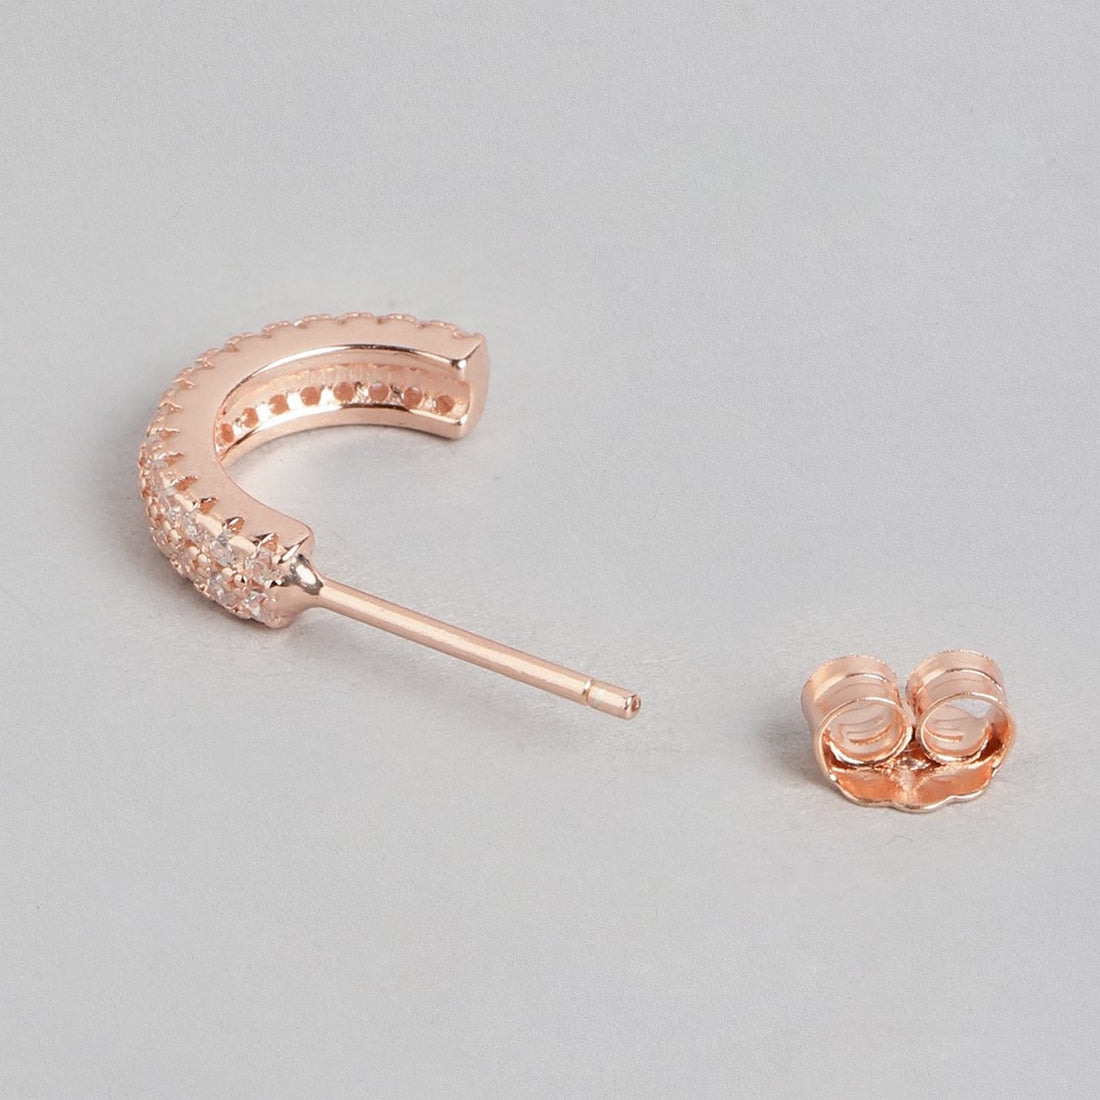 Chic Half Hoop Radiance Rose Gold-Plated CZ 925 Sterling Silver Earrings